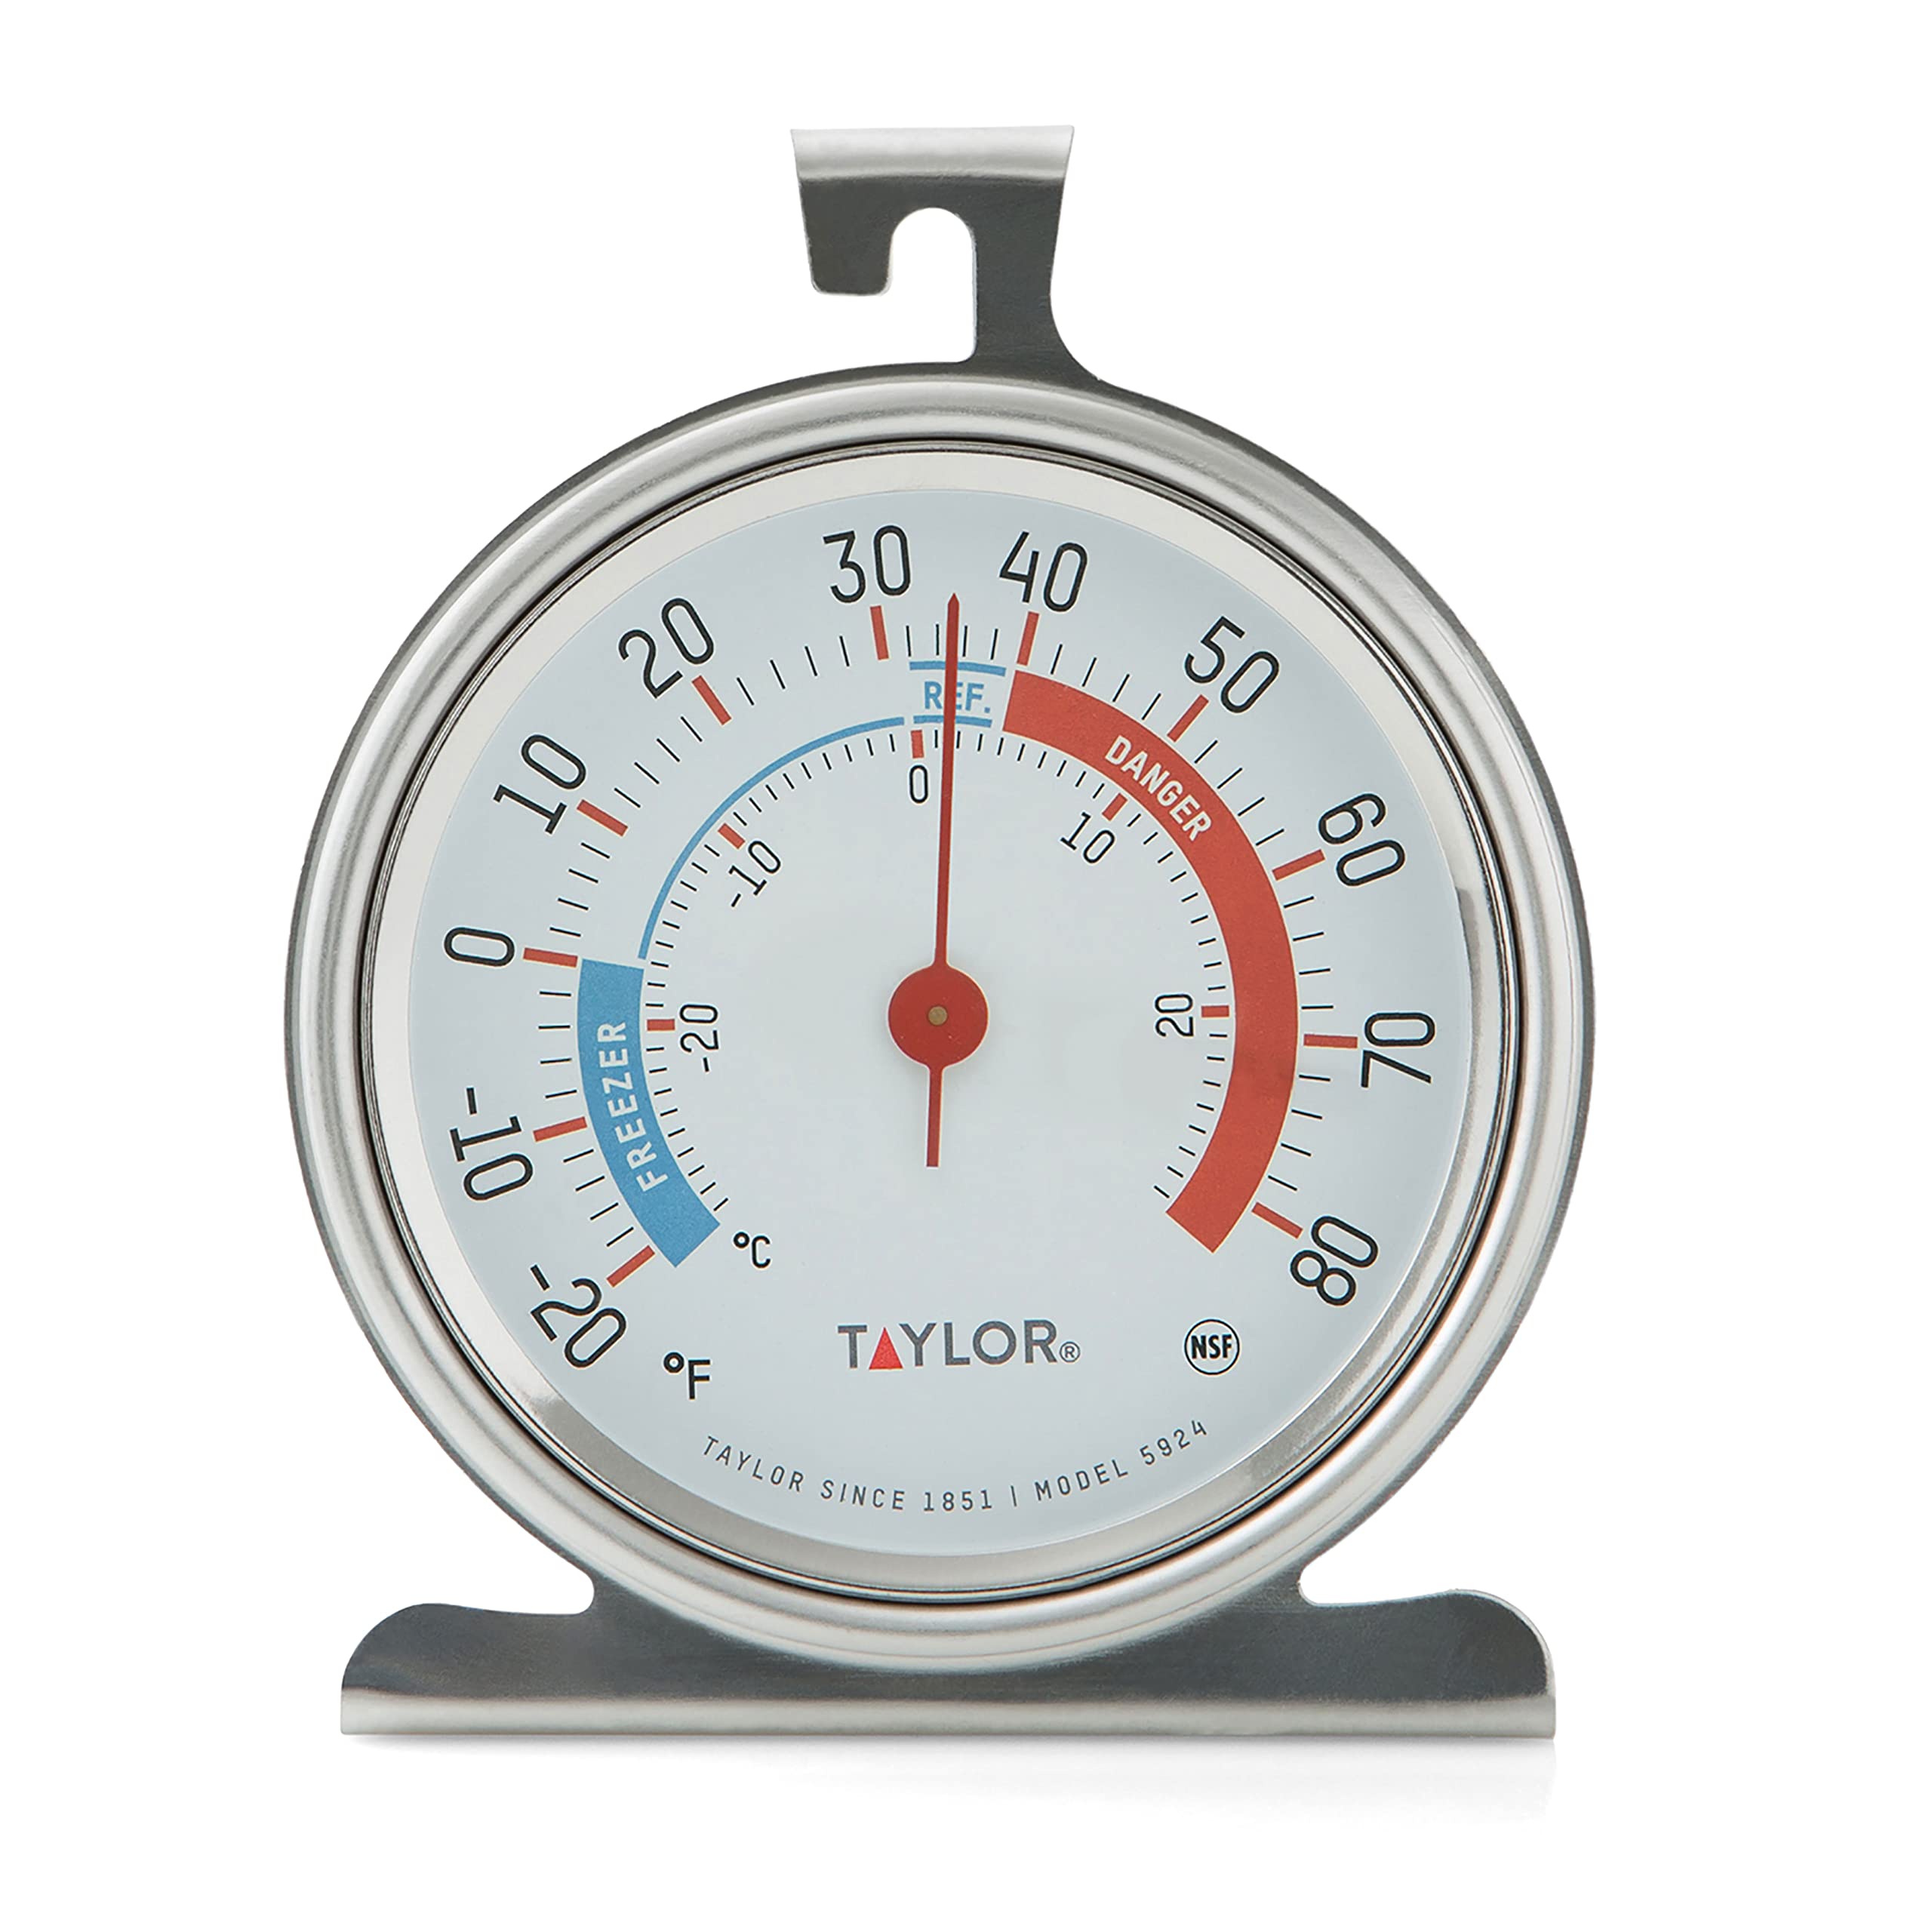 Taylor 5924 Large Dial Kitchen Refrigerator and Freezer Kitchen Thermometer, 3 Inch Dial,Silver